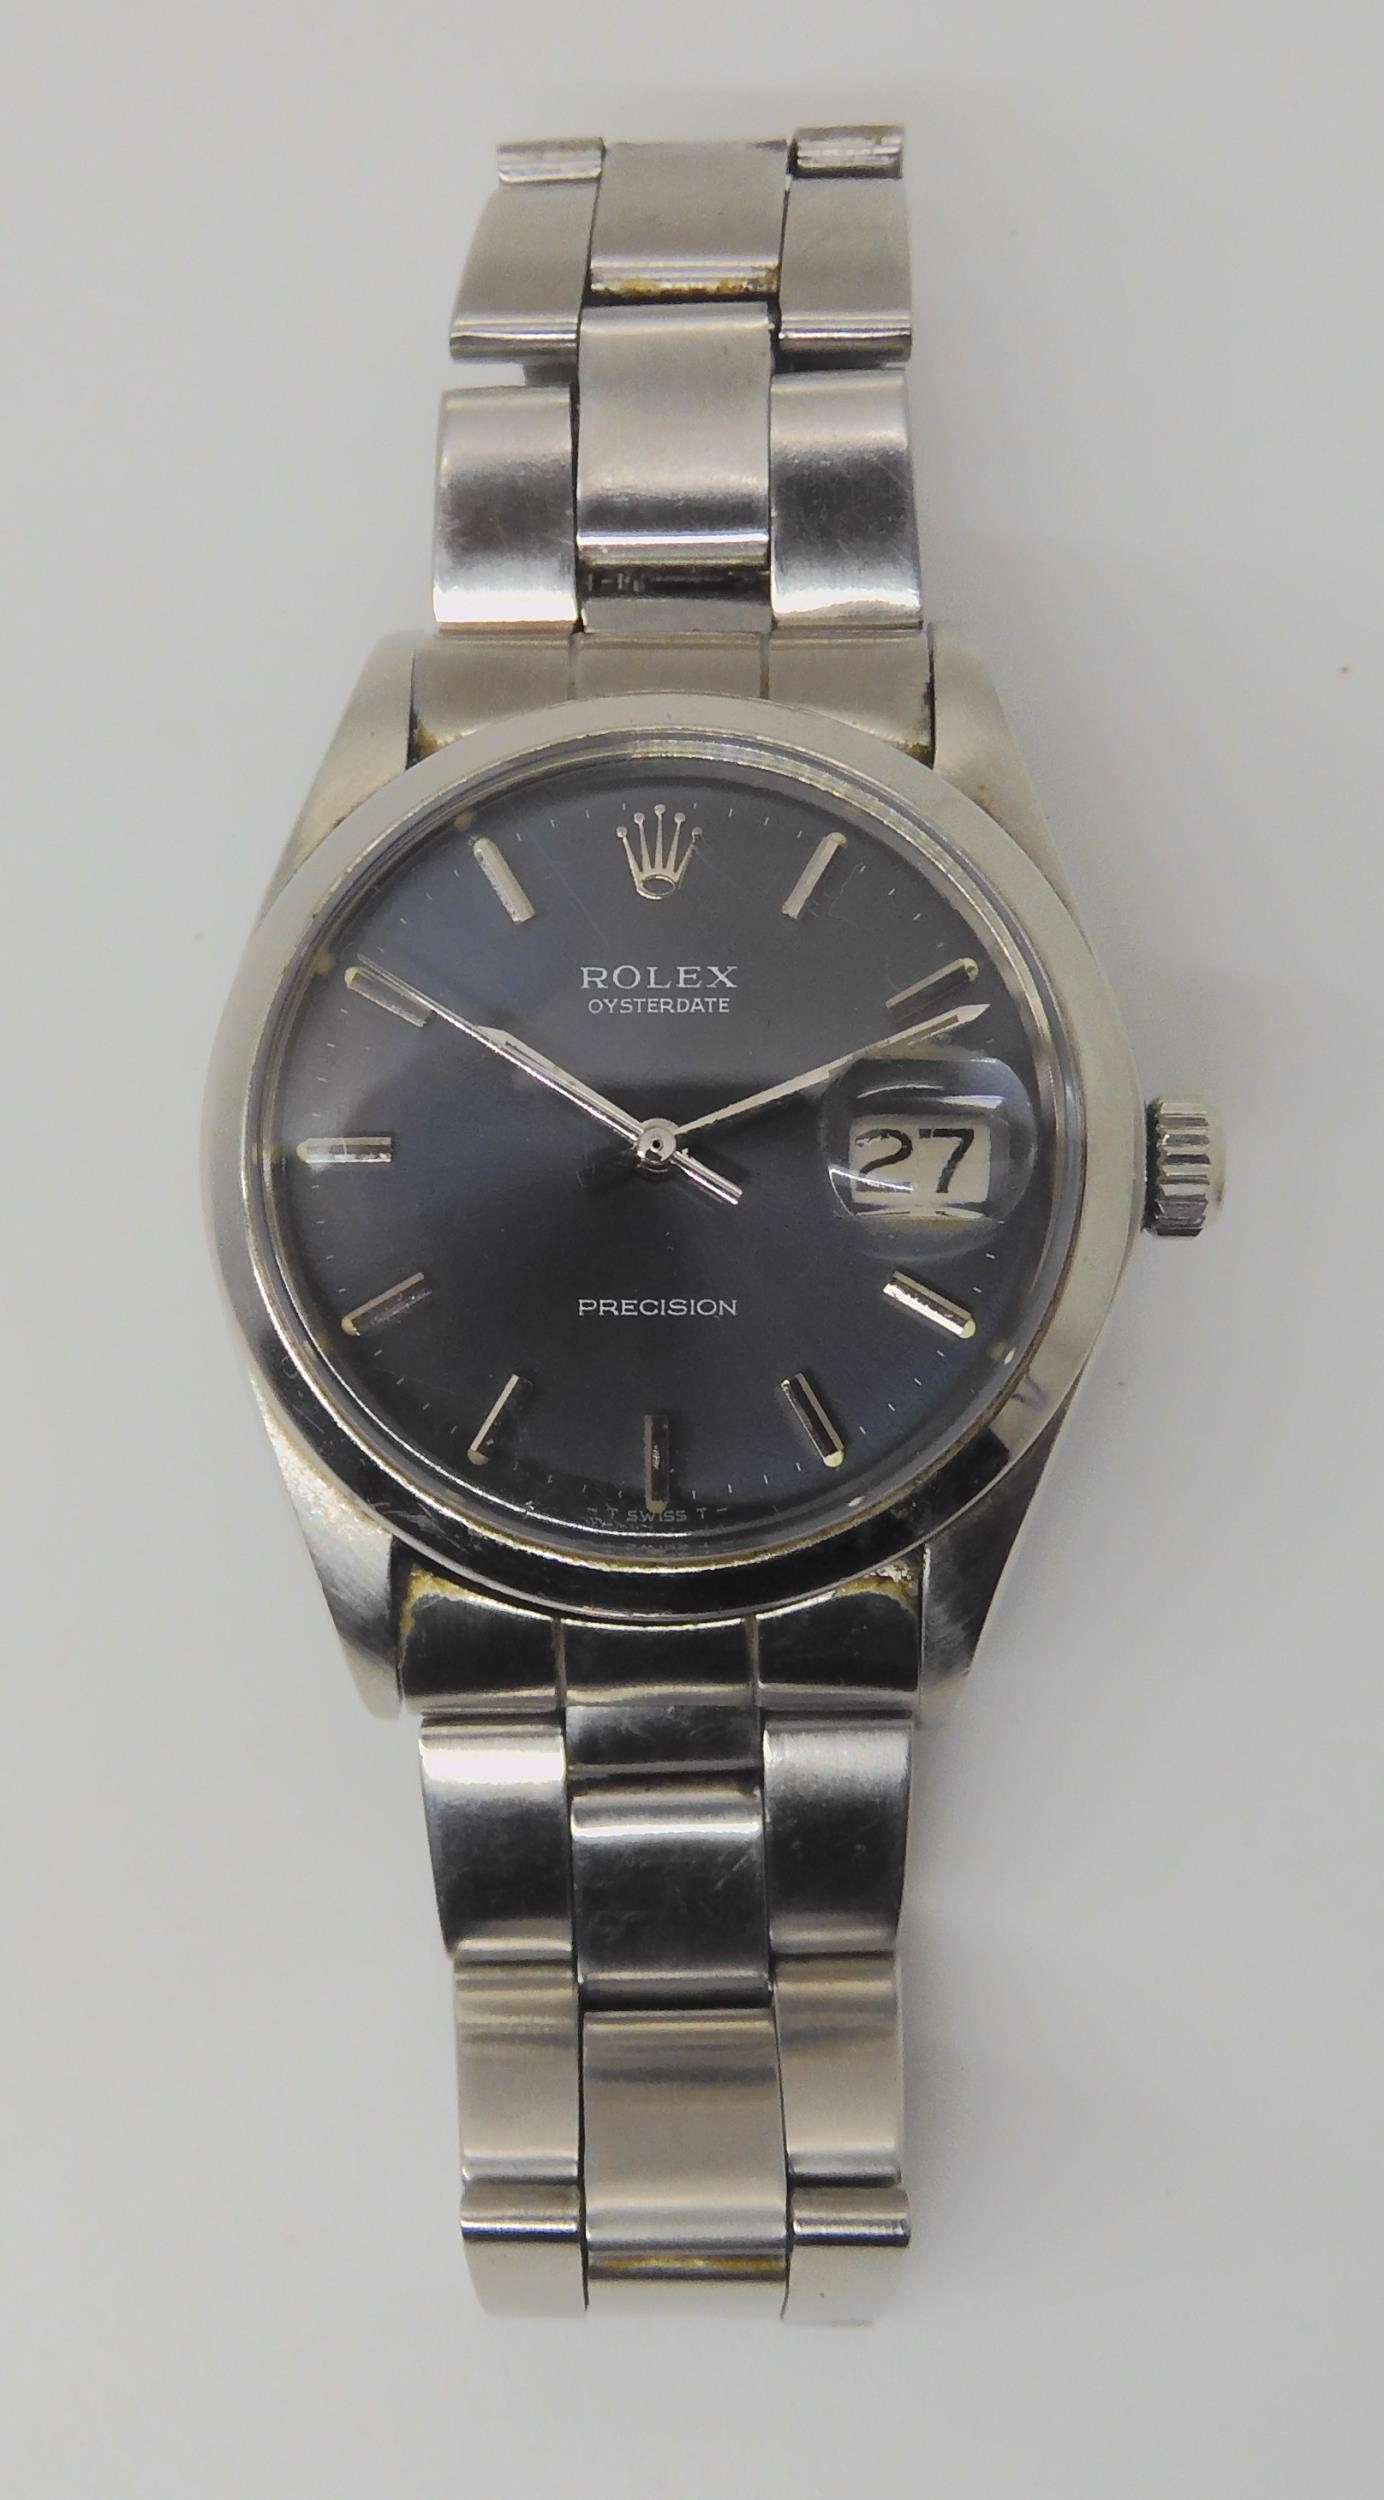 A ROLEX OYSTERDATE PRECISION with dark grey satined dial, silver coloured baton numerals, hands, and - Image 11 of 14